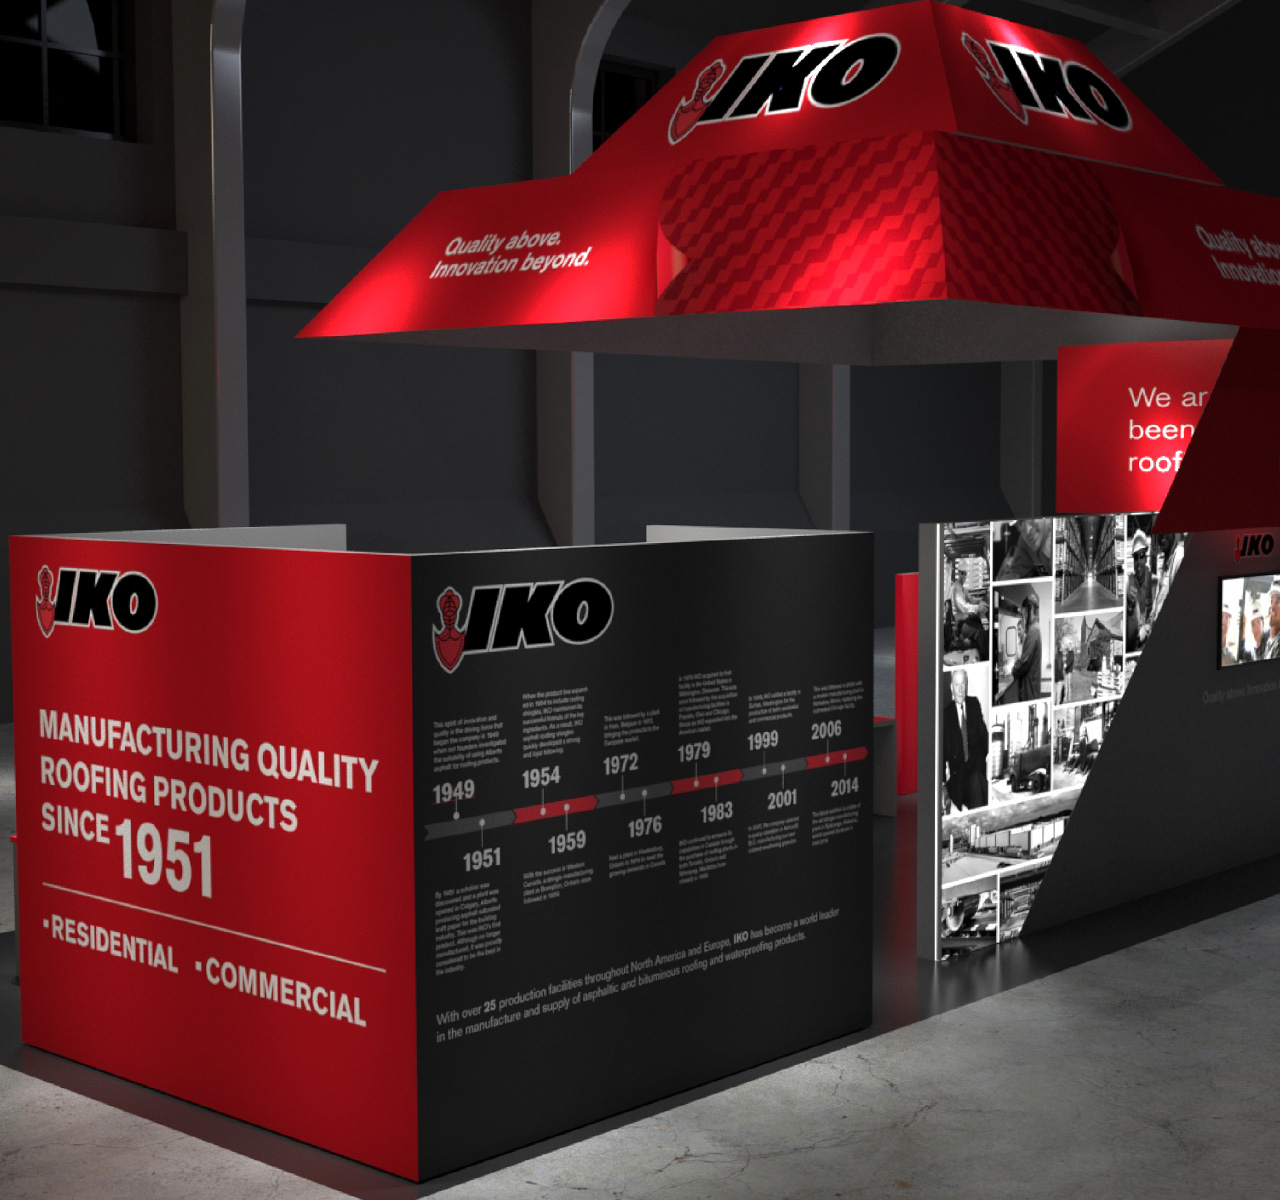 Tradeshow Booth Design for Our Roofing Client IKO - Central Station